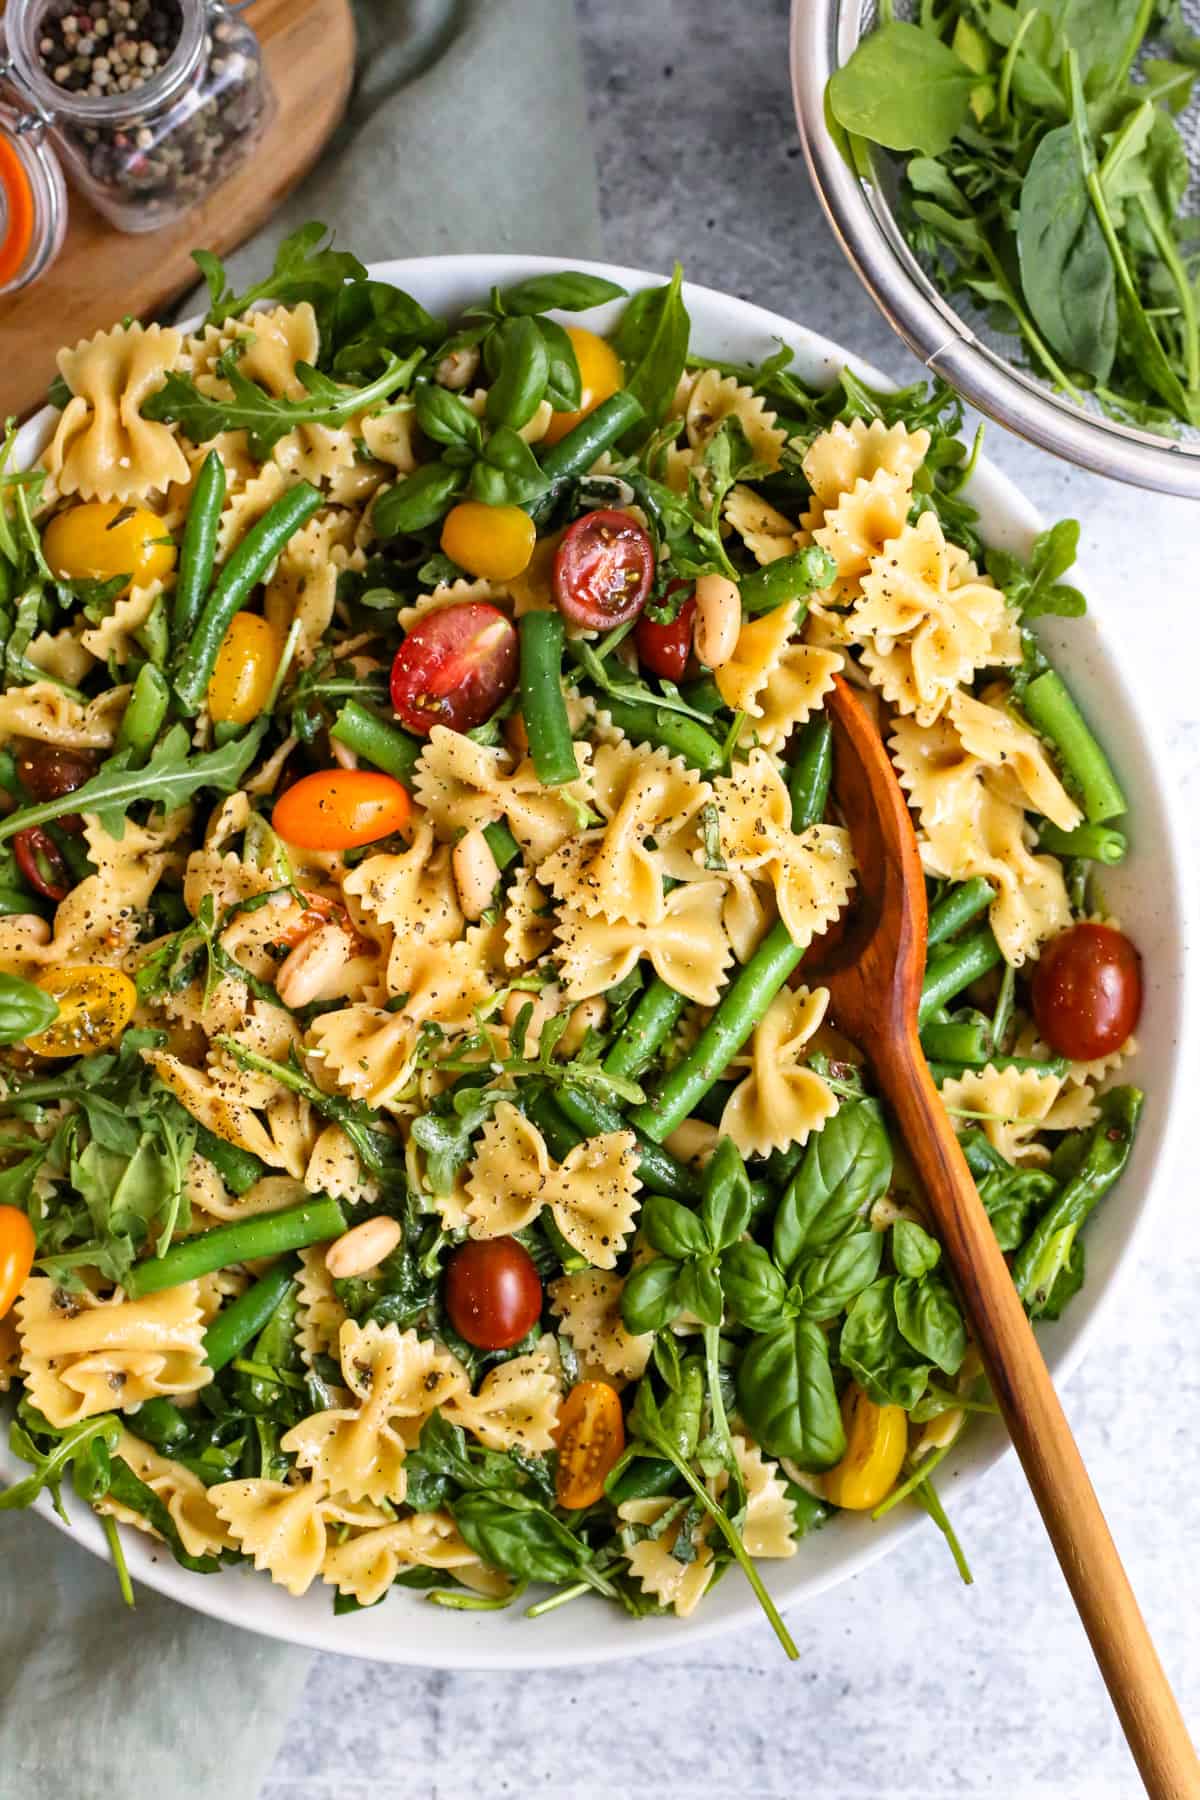 An overhead shot of a bowl of pasta salad with beans and leafy greens.